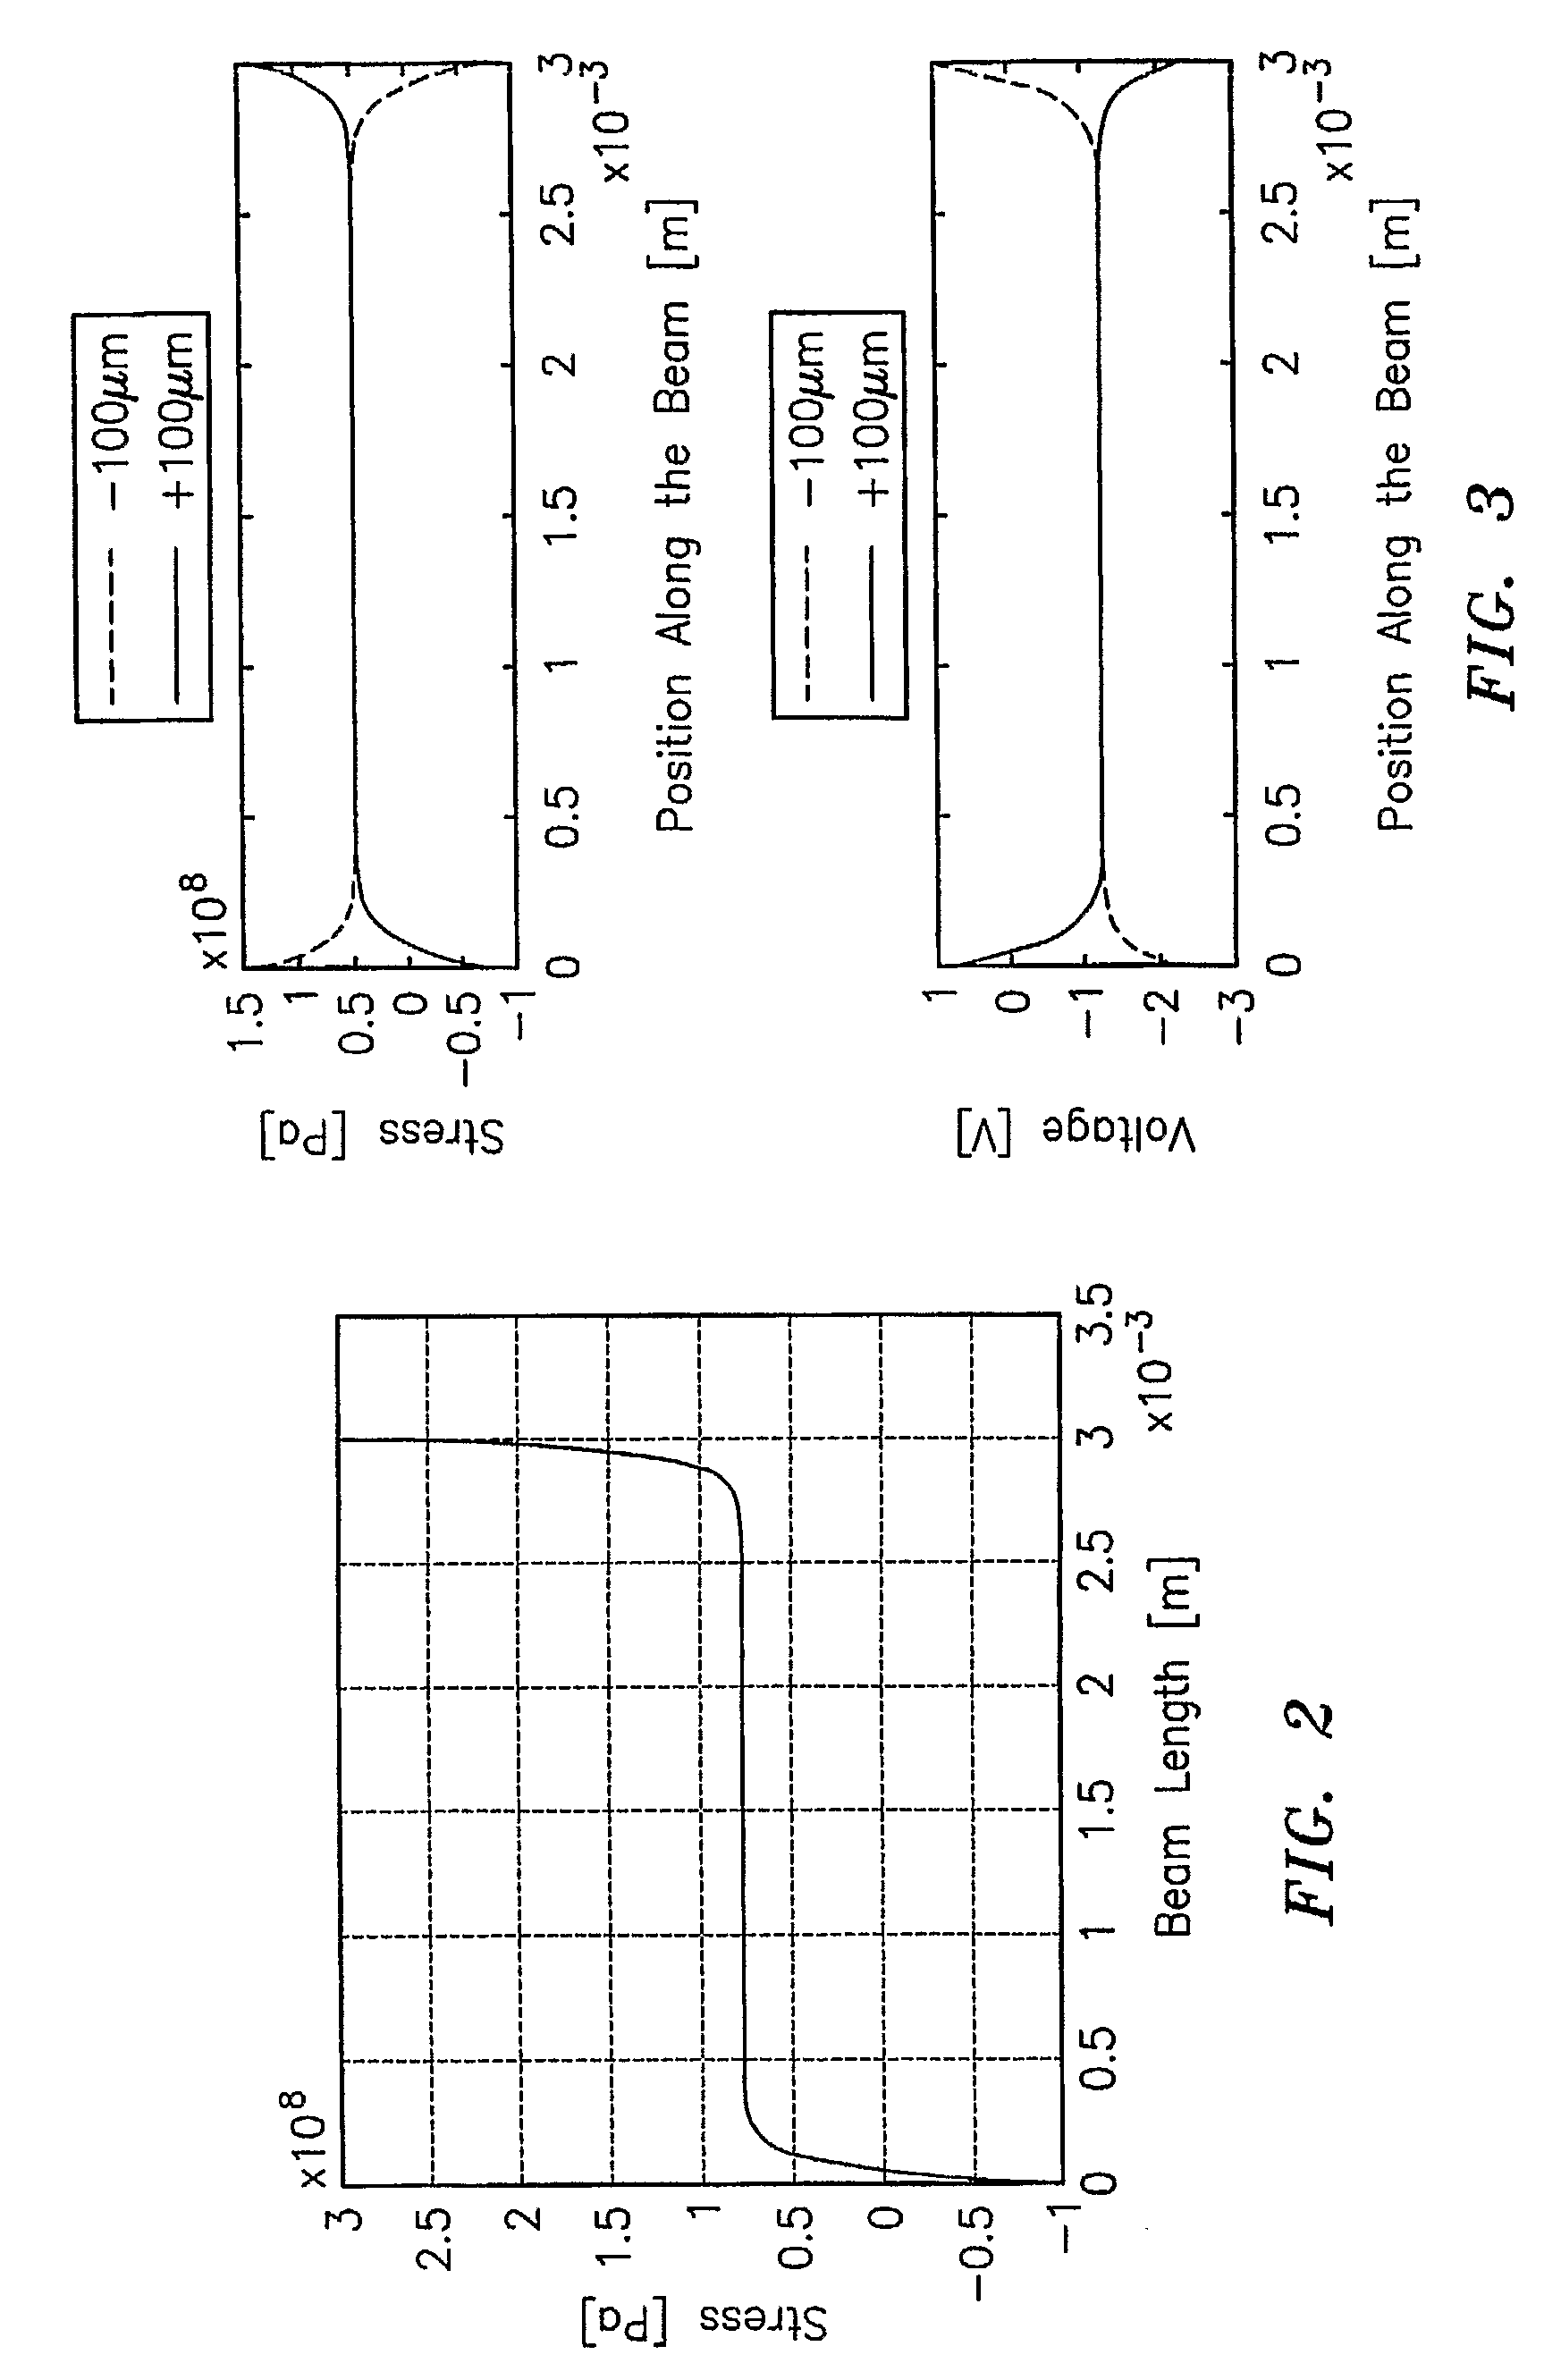 Power harvesting scheme based on piezoelectricity and nonlinear deflections